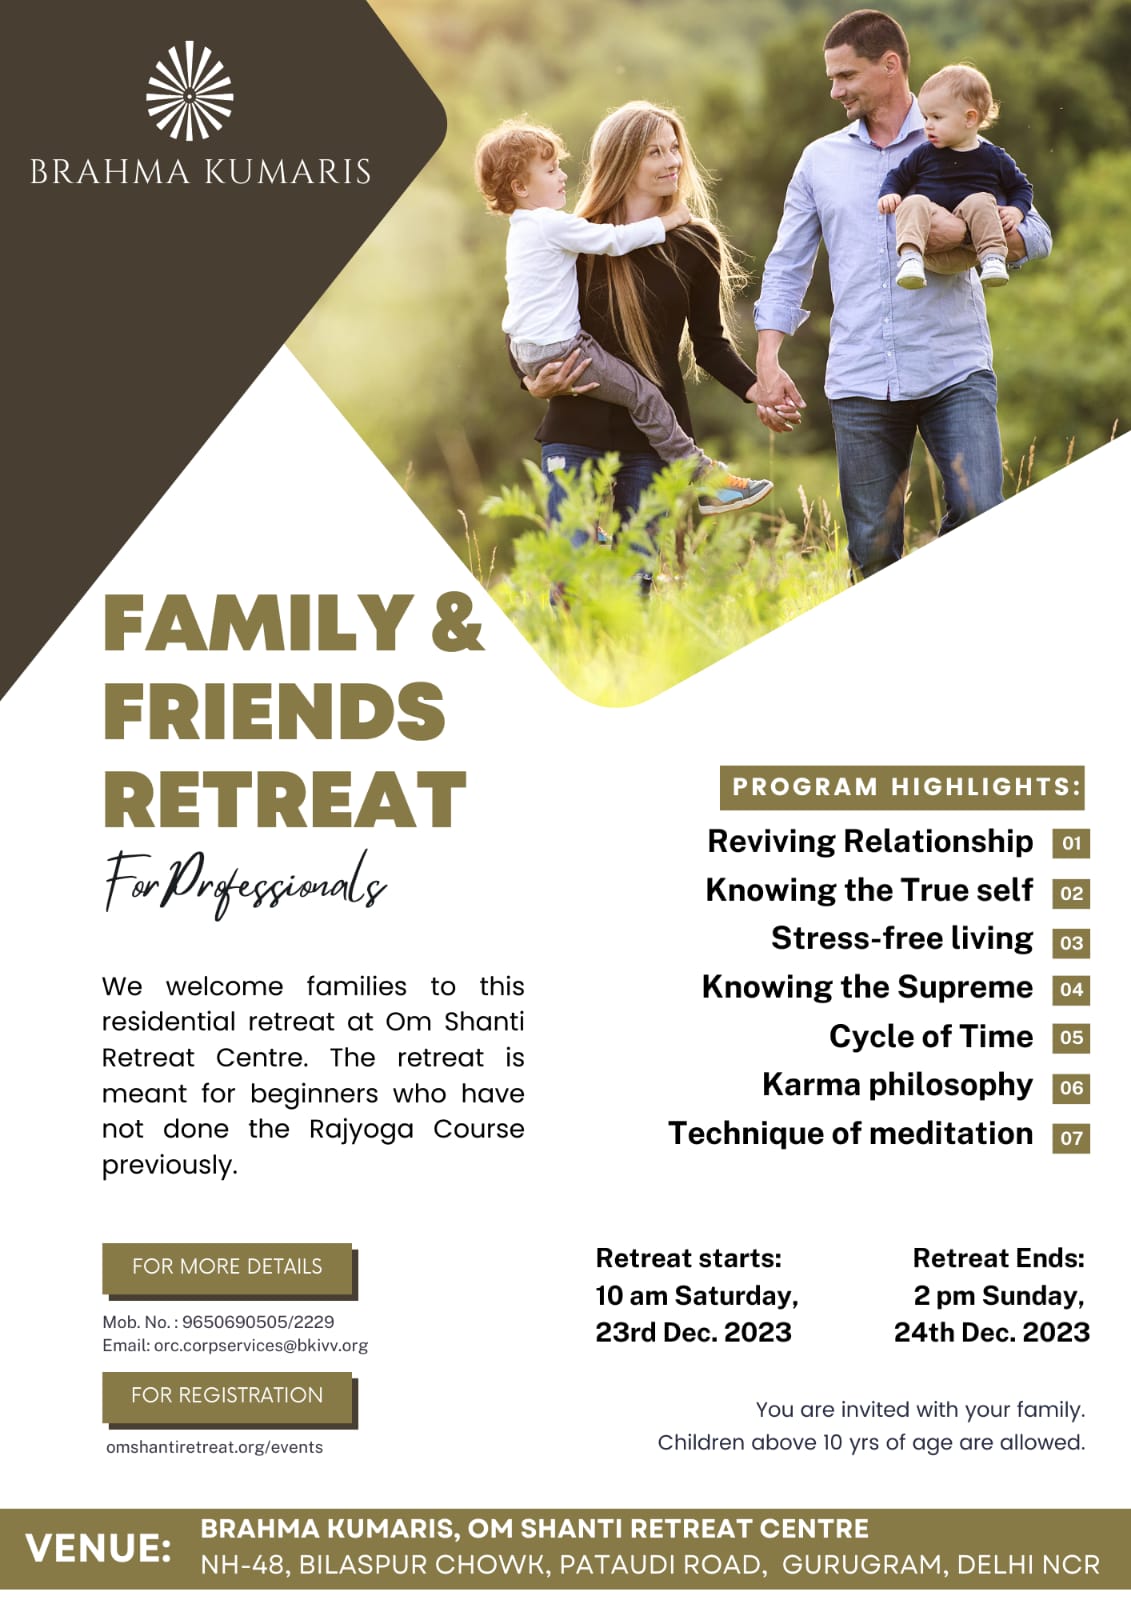 Family & friends meditation retreat for professionals